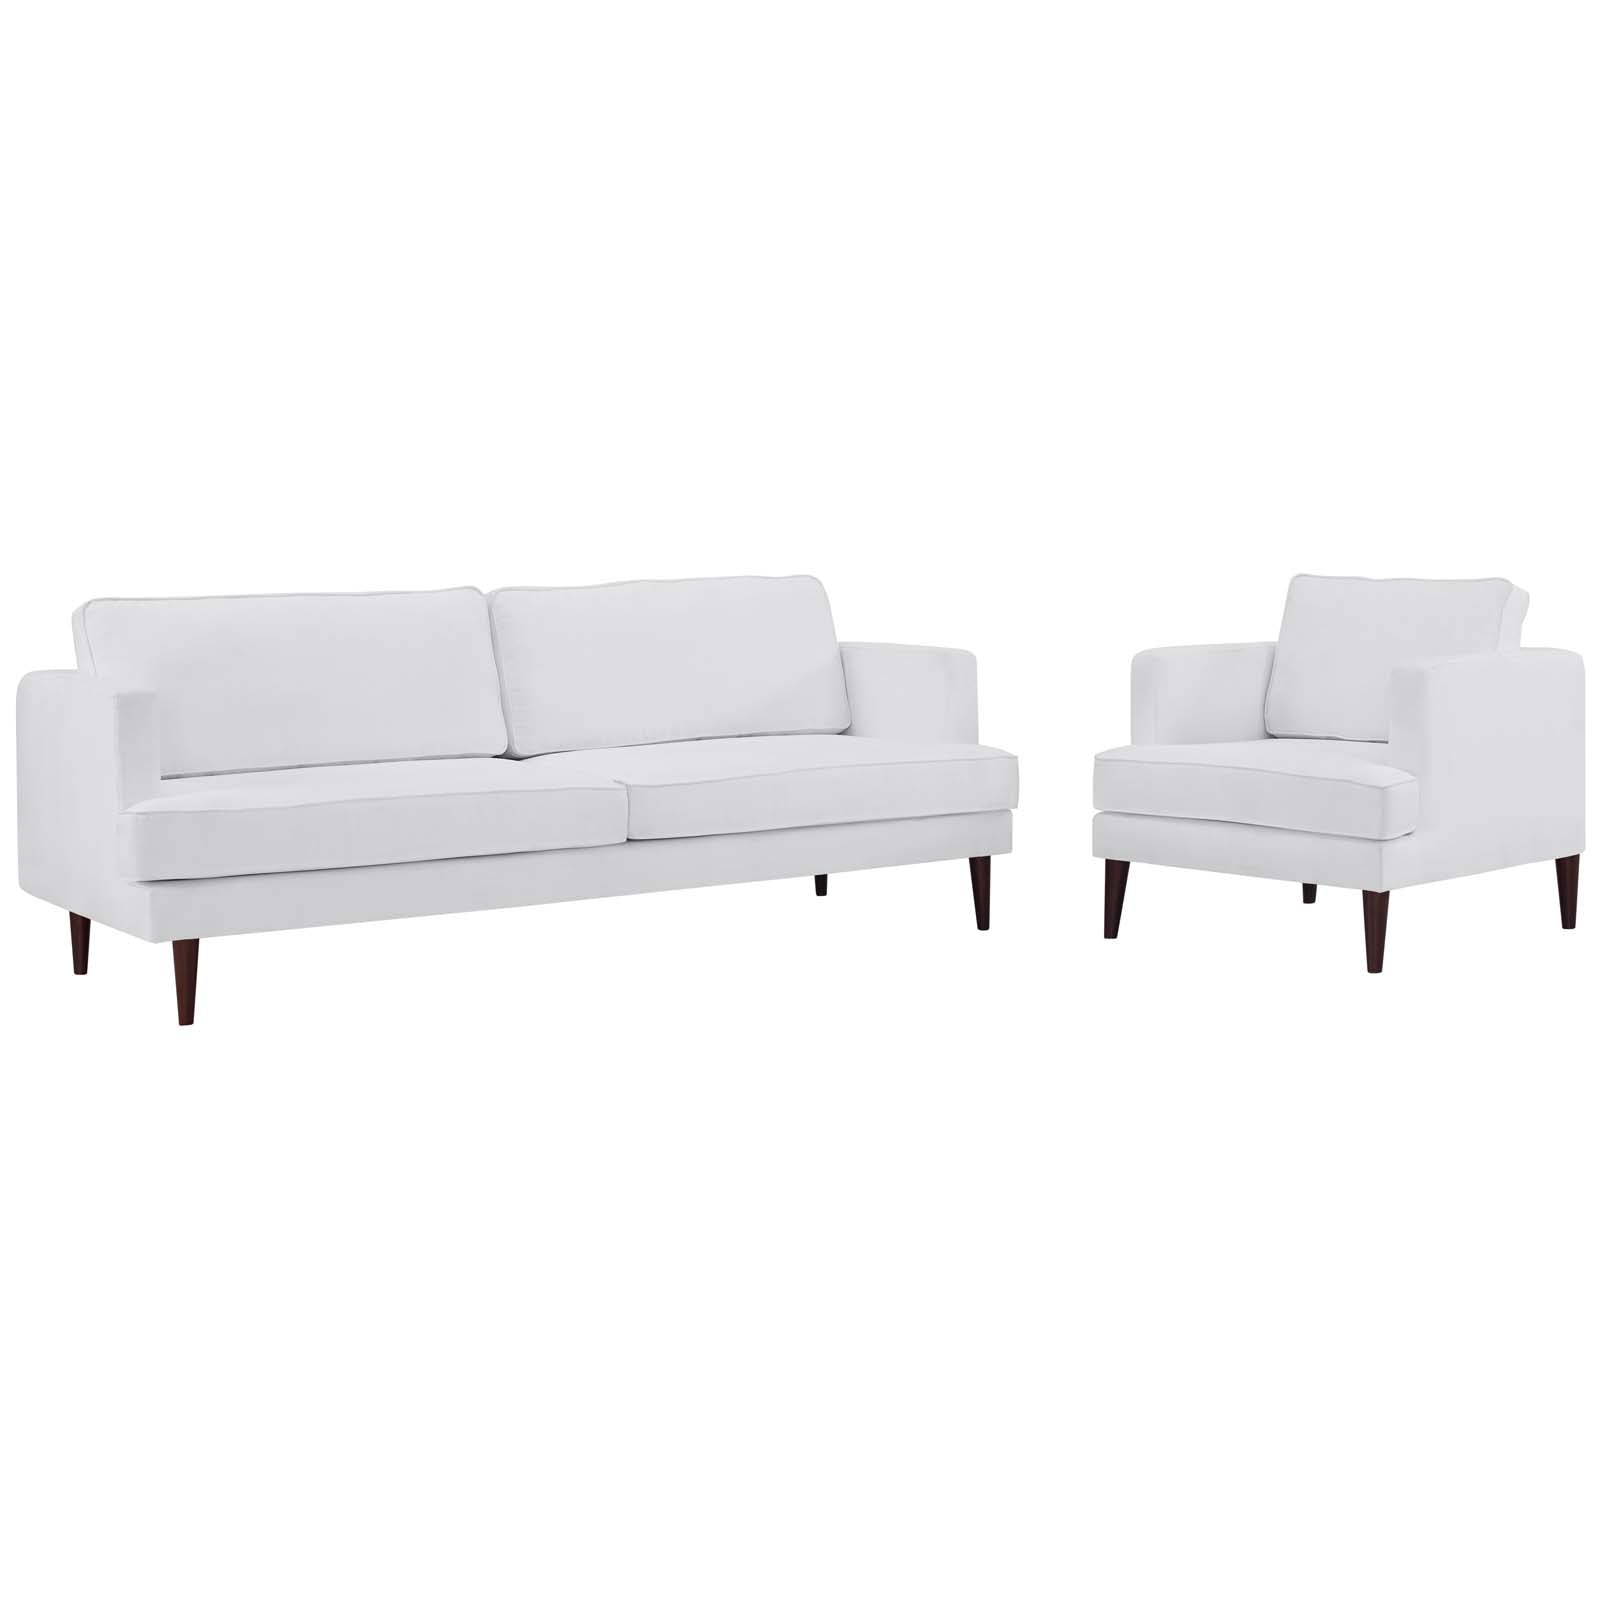 Agile Upholstered Fabric Sofa and Armchair Set - East Shore Modern Home Furnishings